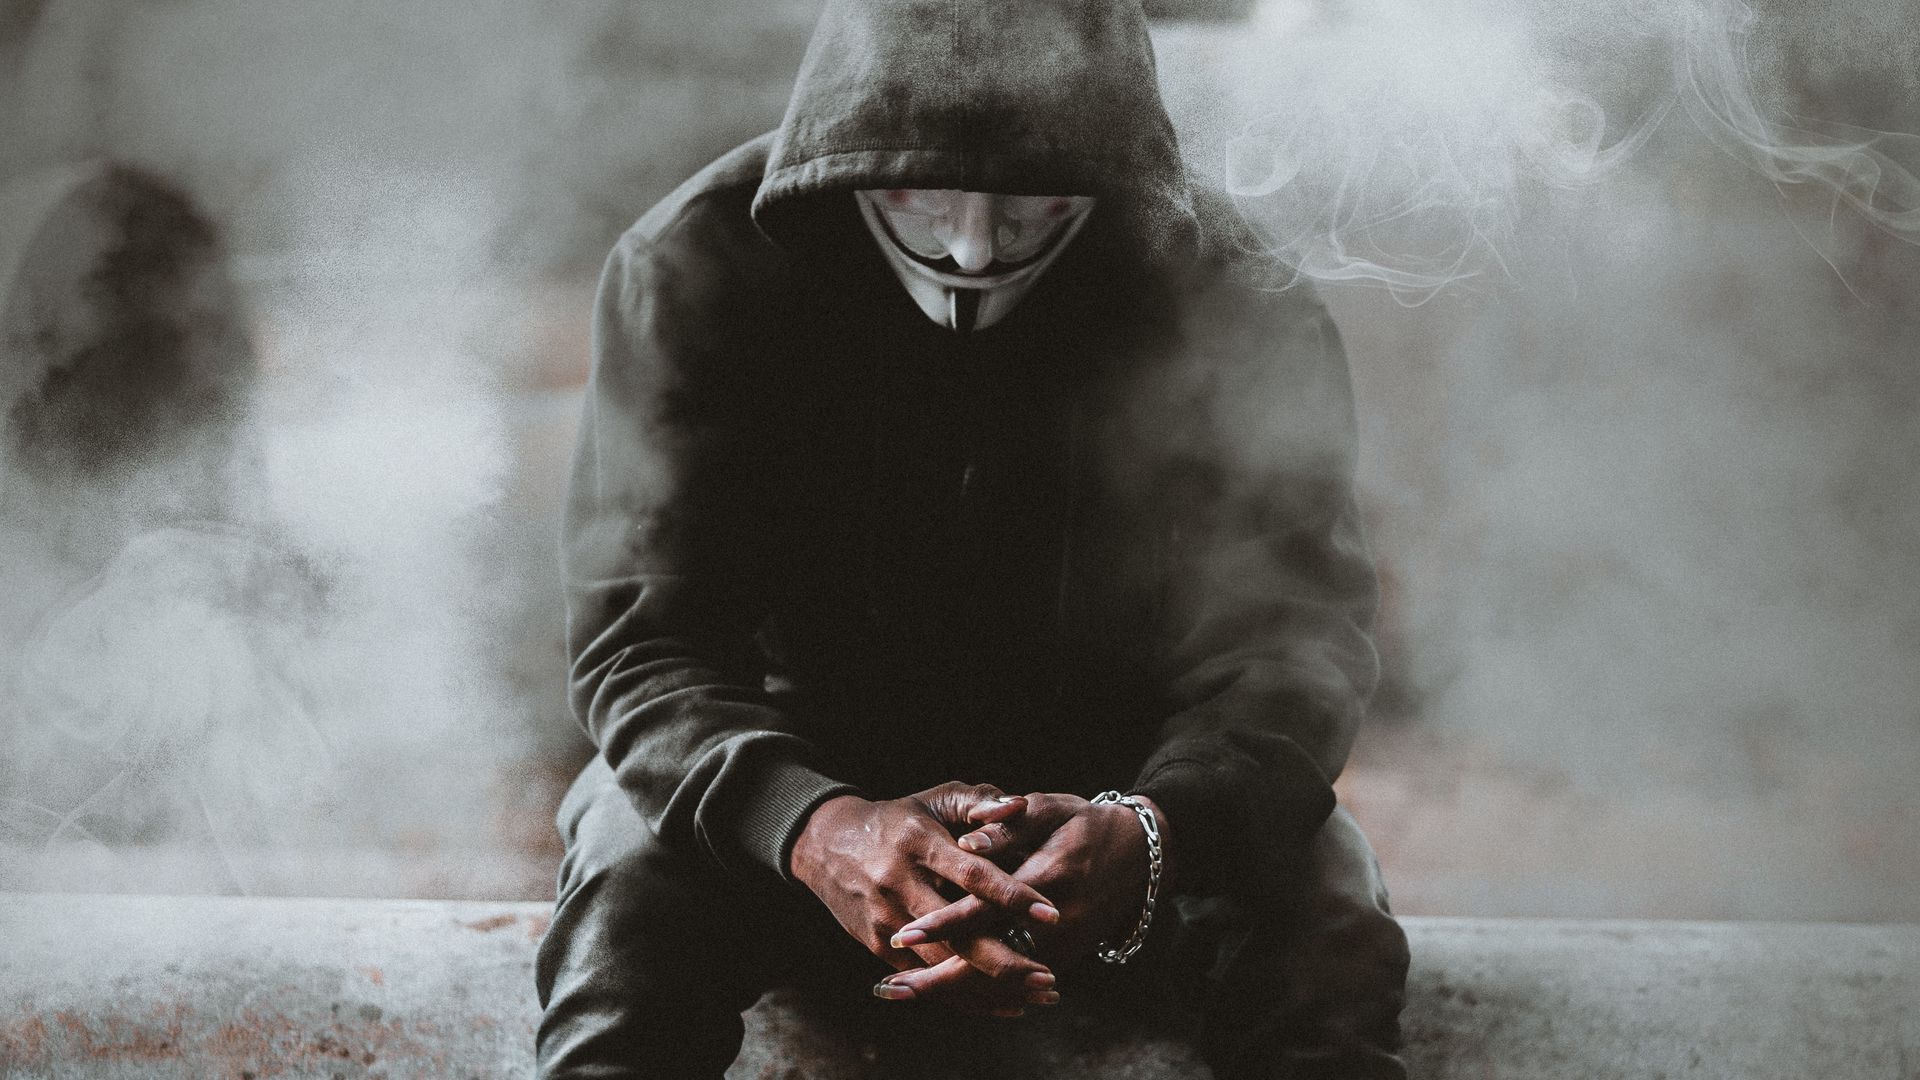 Download wallpaper 1920x1080 anonymous, mask, hood, smoke, person full hd,  hdtv, fhd, 1080p hd background